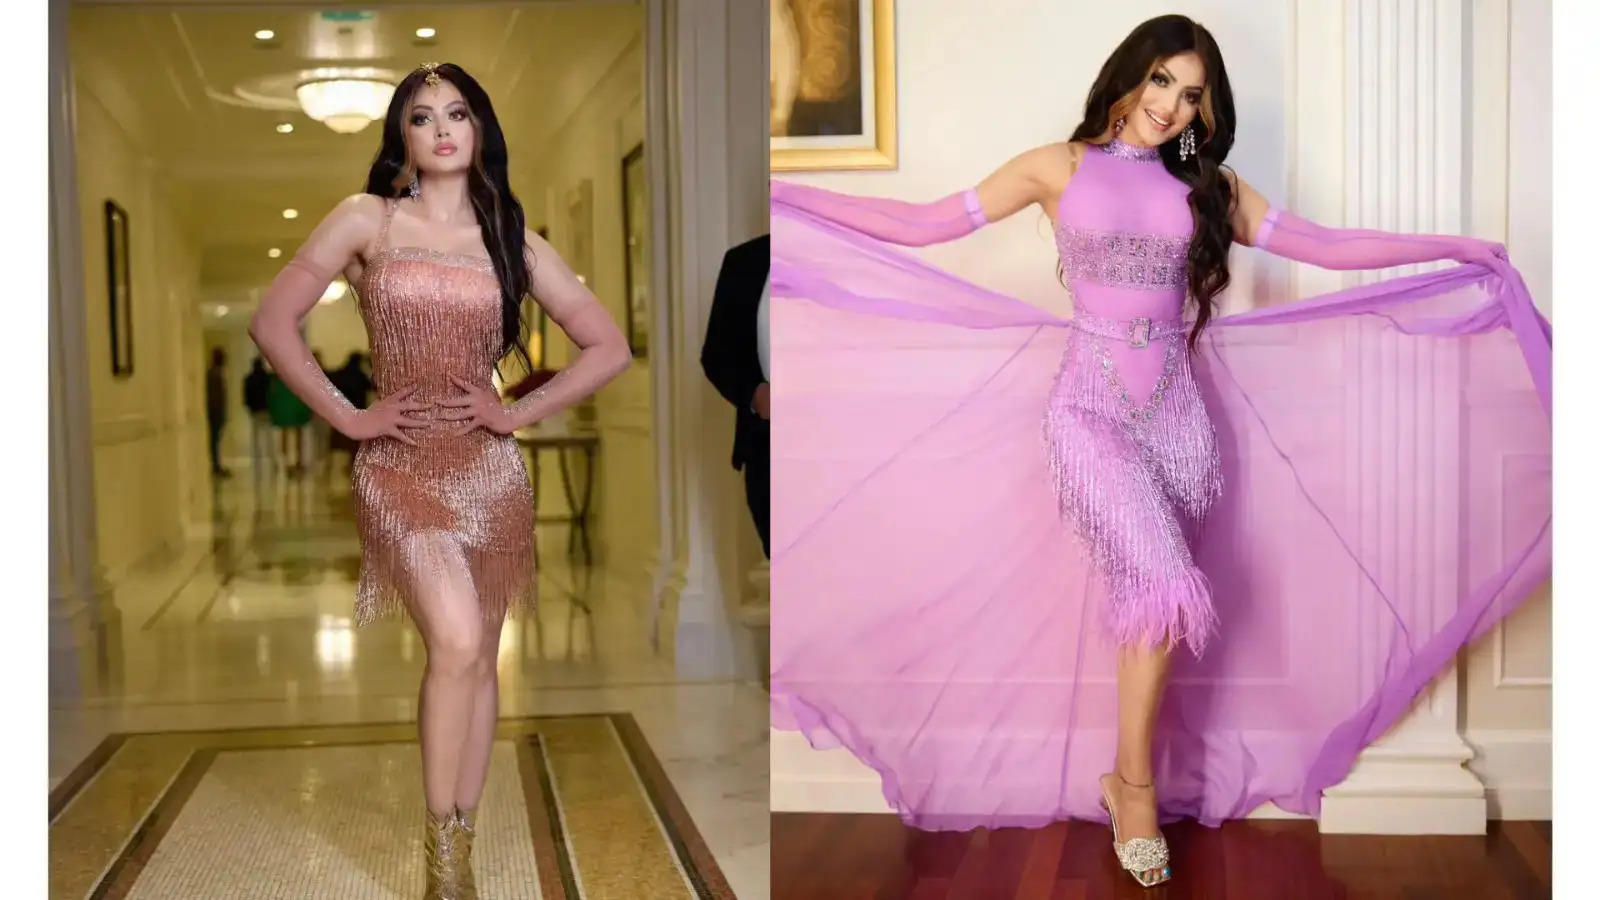 Urvashi Rautela pocketed 50 million/5 crore in Dubai’s New Year as one of the highest-paid performers per minute